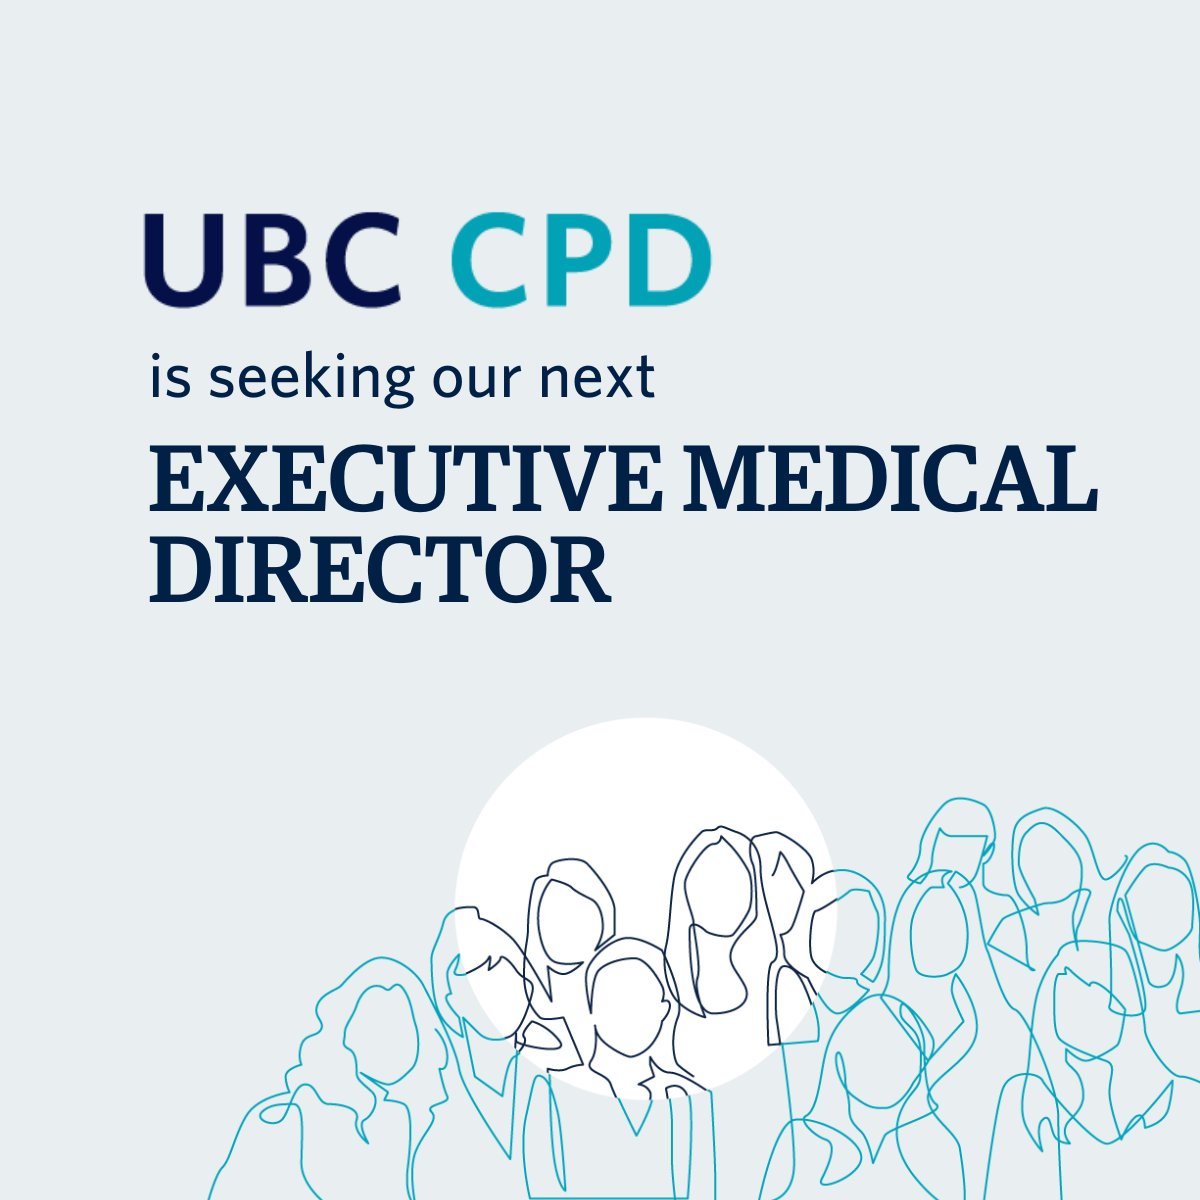 Are you an experienced physician with strong leadership skills and a passion for #MedEd? Take part in advancing continuing professional development as the Executive Medical Director, #UBCCPD.  Learn more about this role and apply. bit.ly/3ZyMbvL